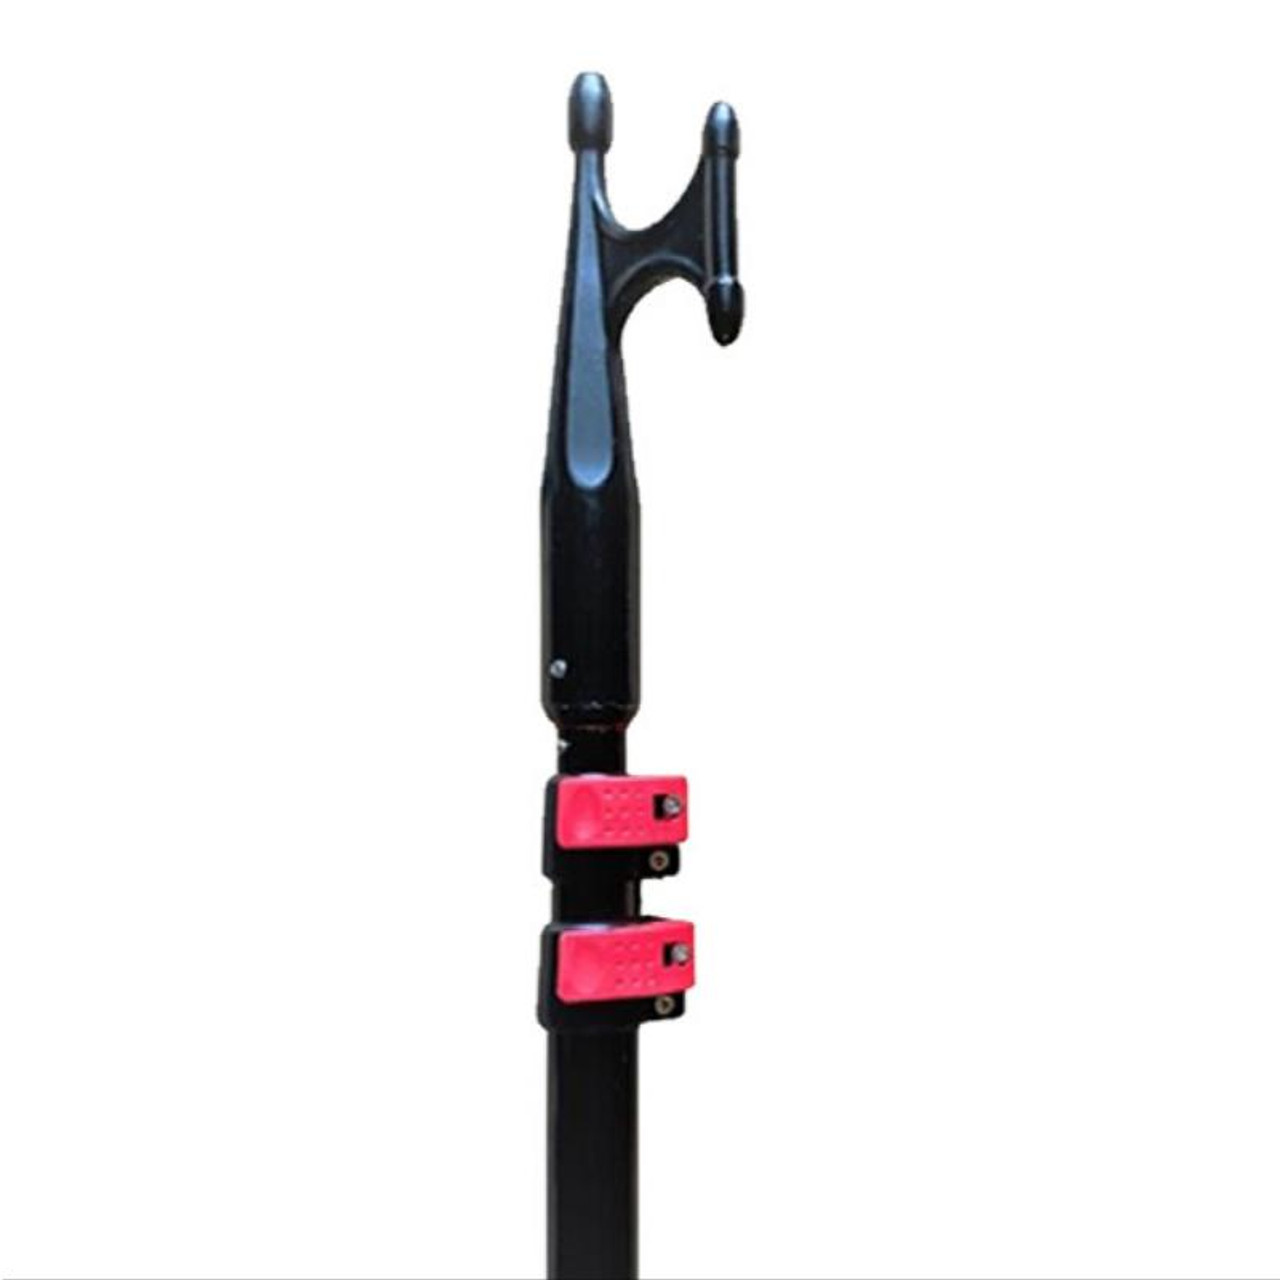 Buoycatcher Plastic Boat Hook with Telescopic Pole (BC205)